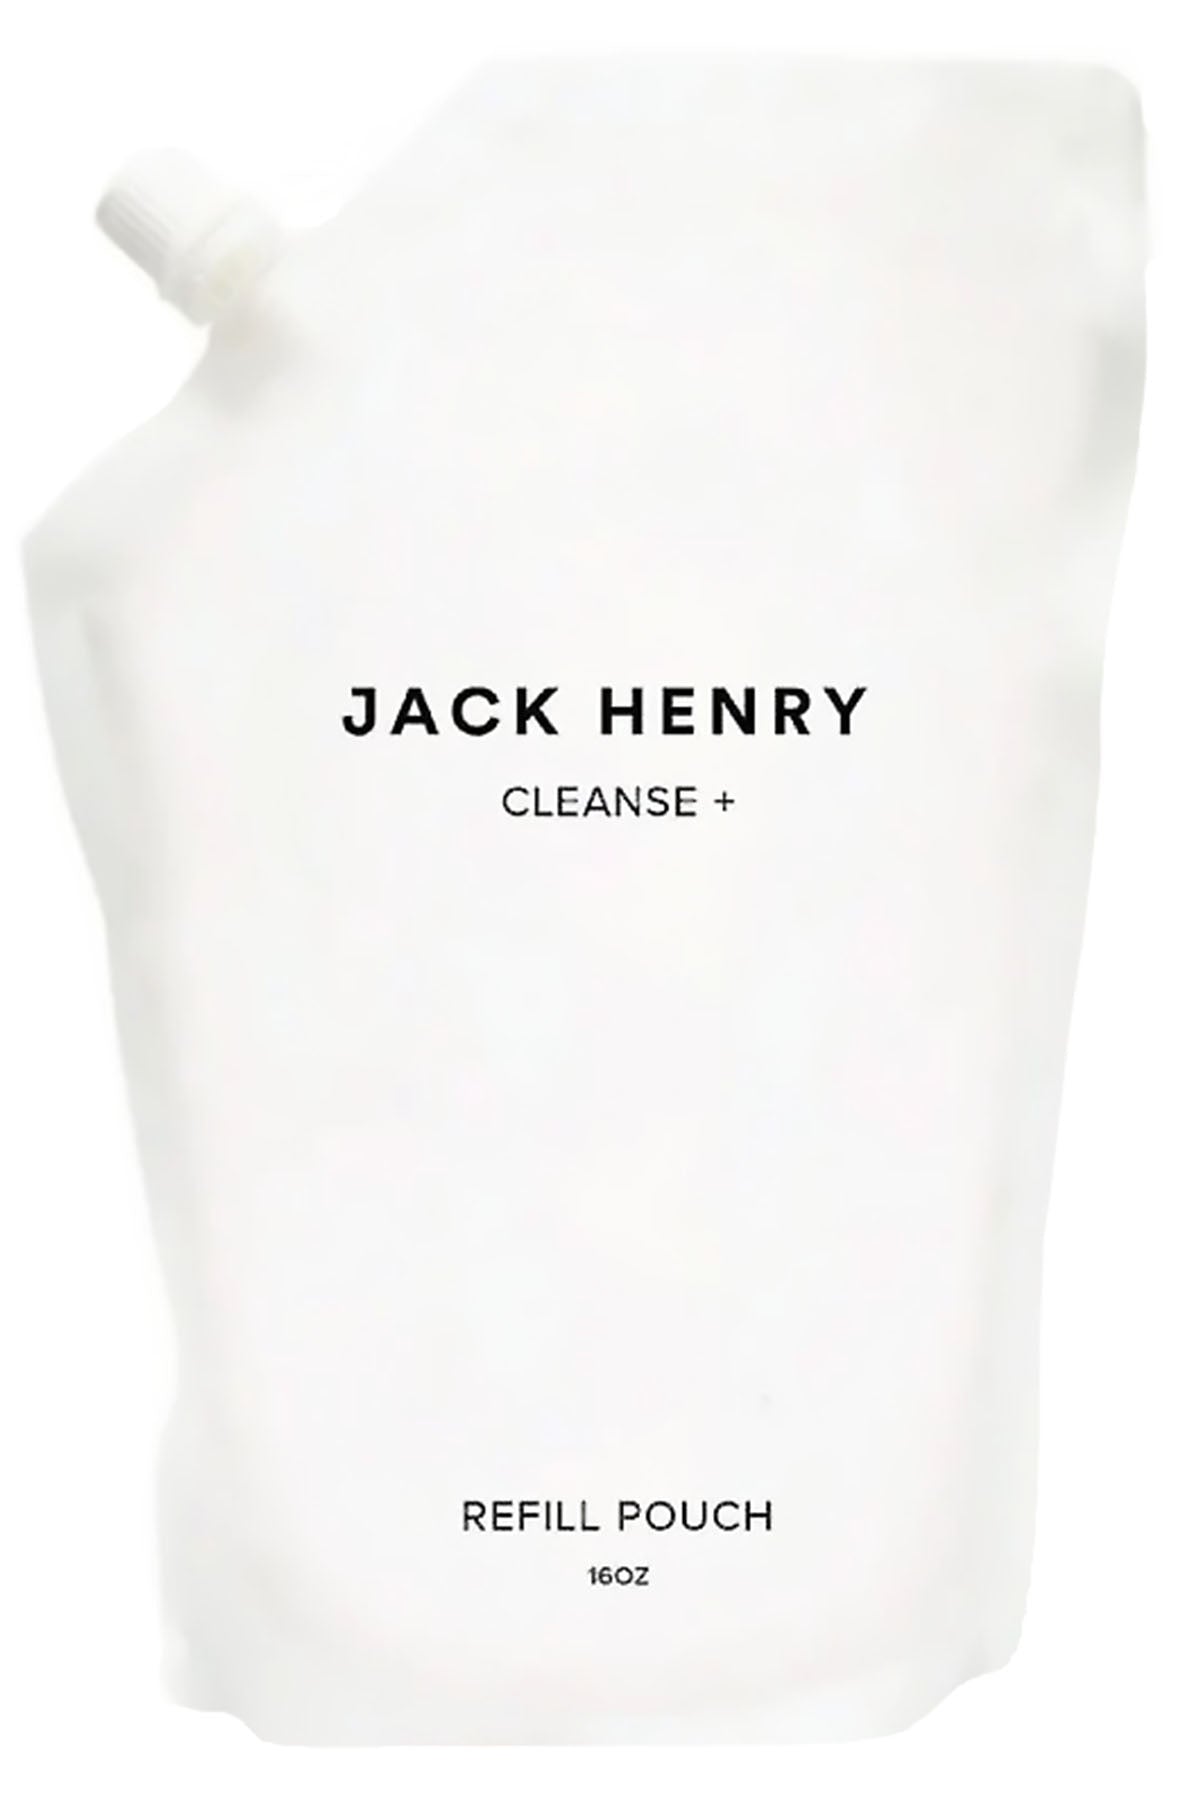 Jack Henry Cleanser+ Refill Pouch